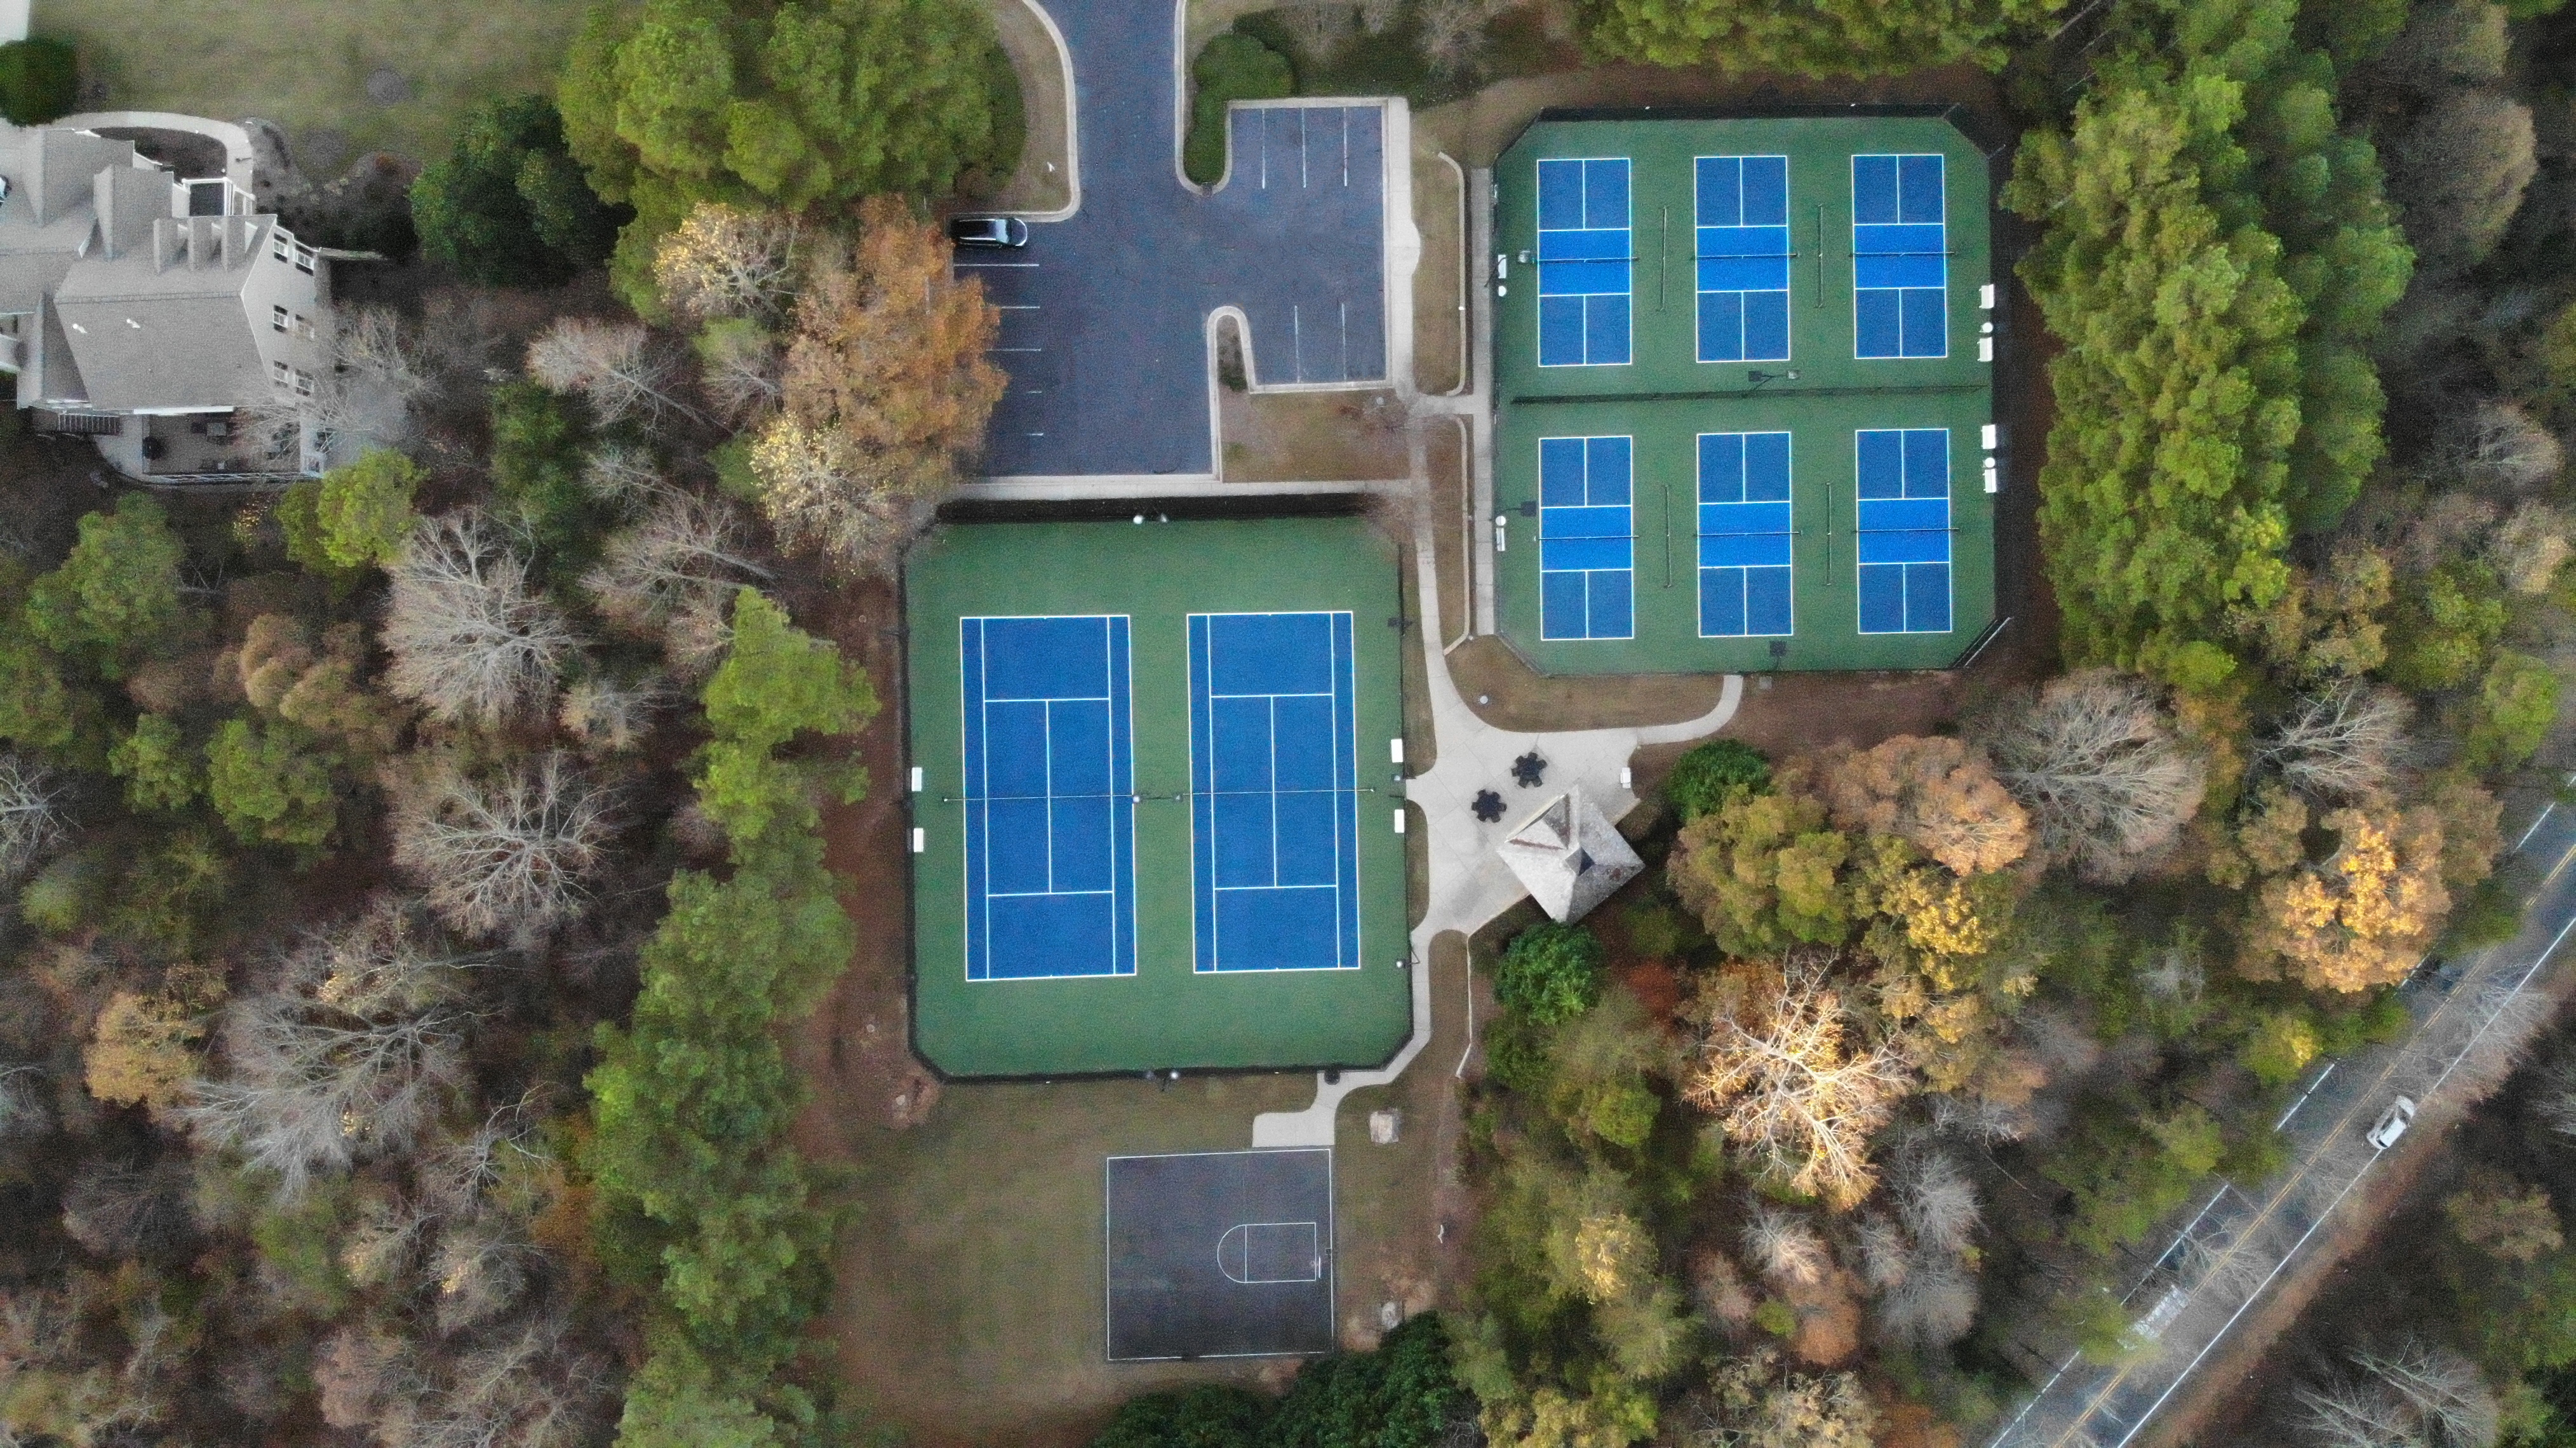 Lighted Tennis and Pickleball Courts